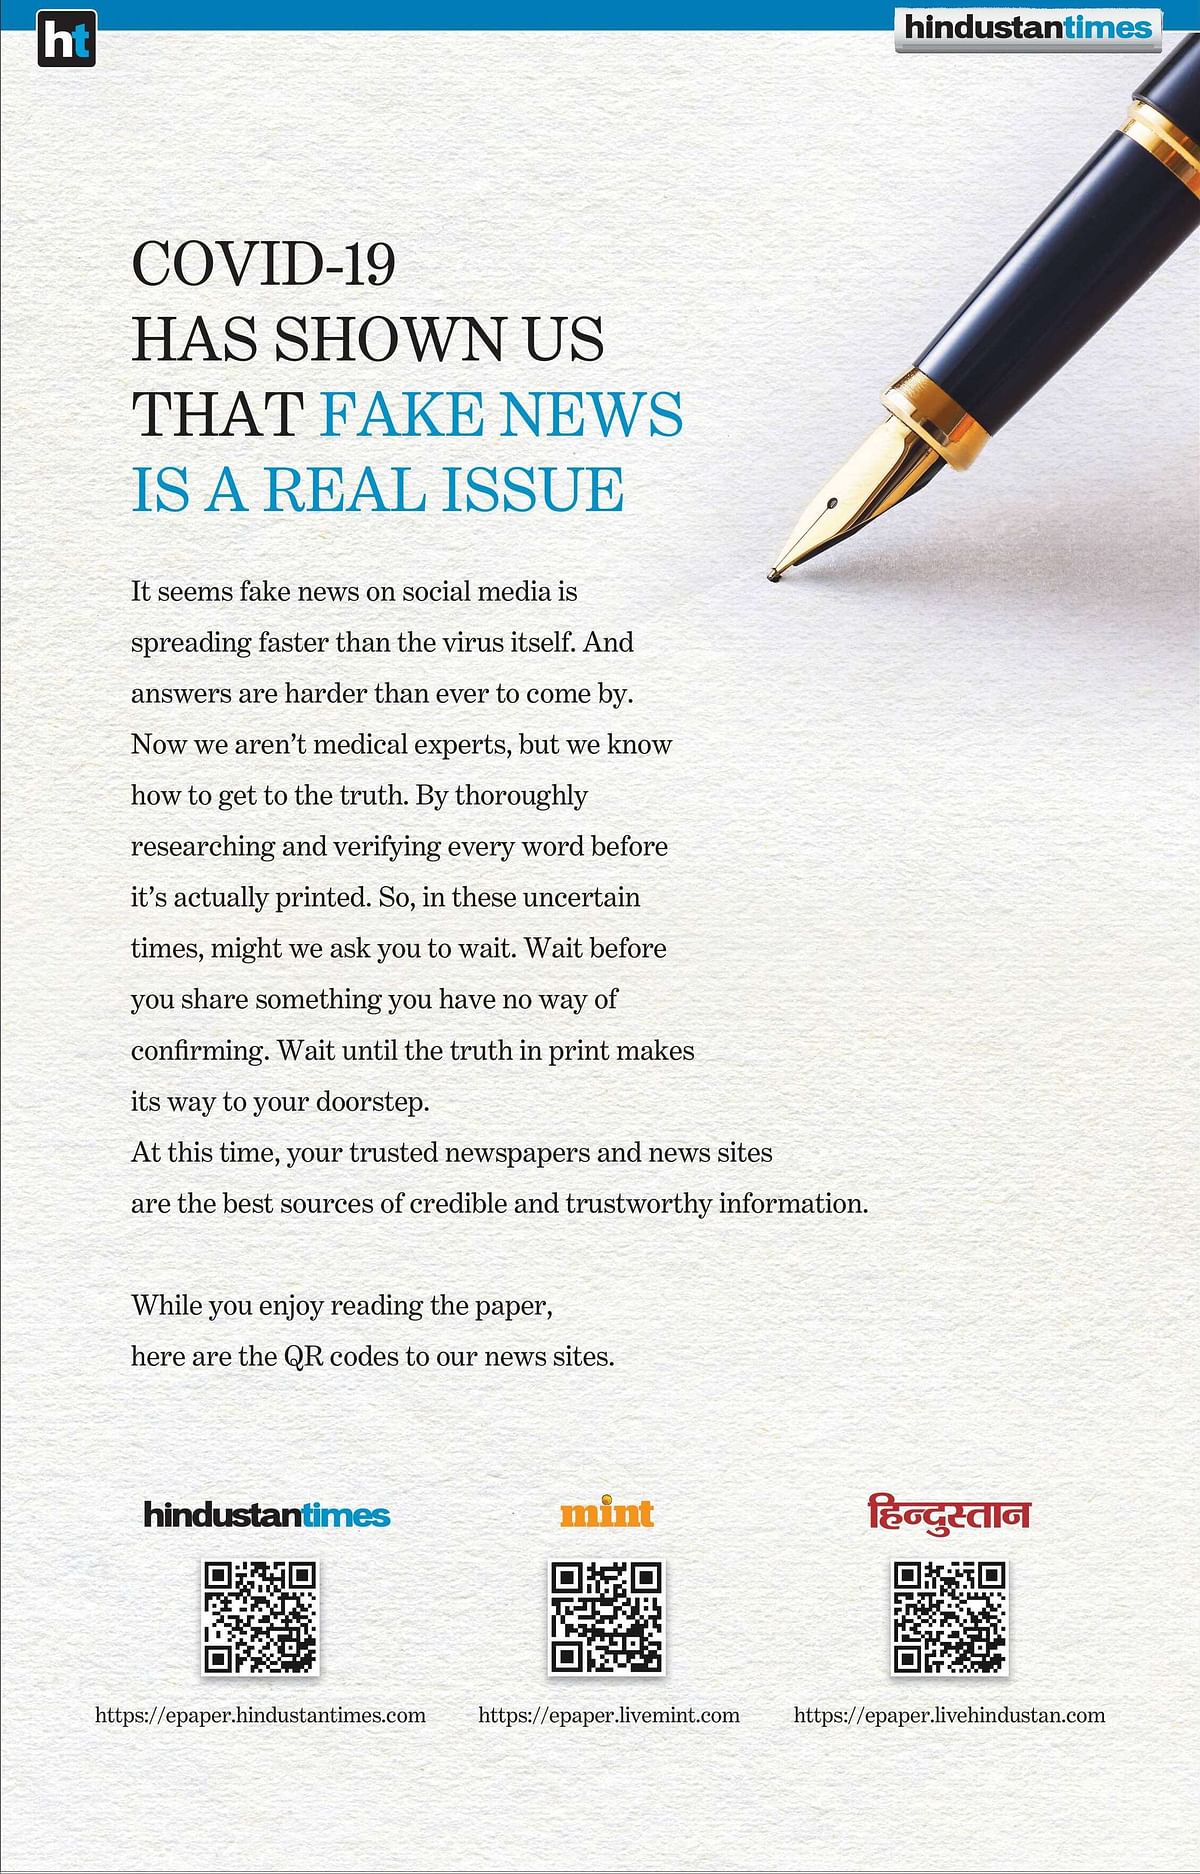 Hindustan Times' new ad takes the battle against fake news forward